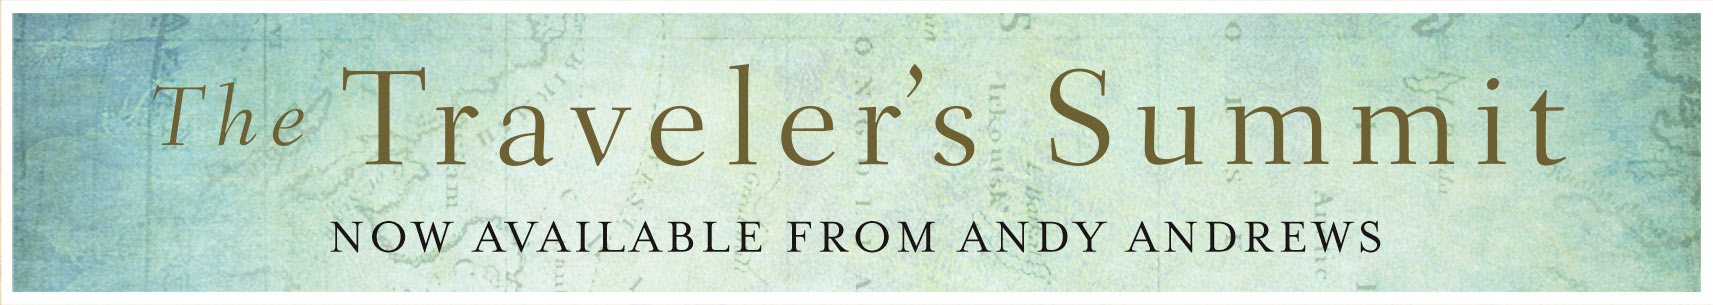 The Traveler's Summit Now Available from Andy Andrews